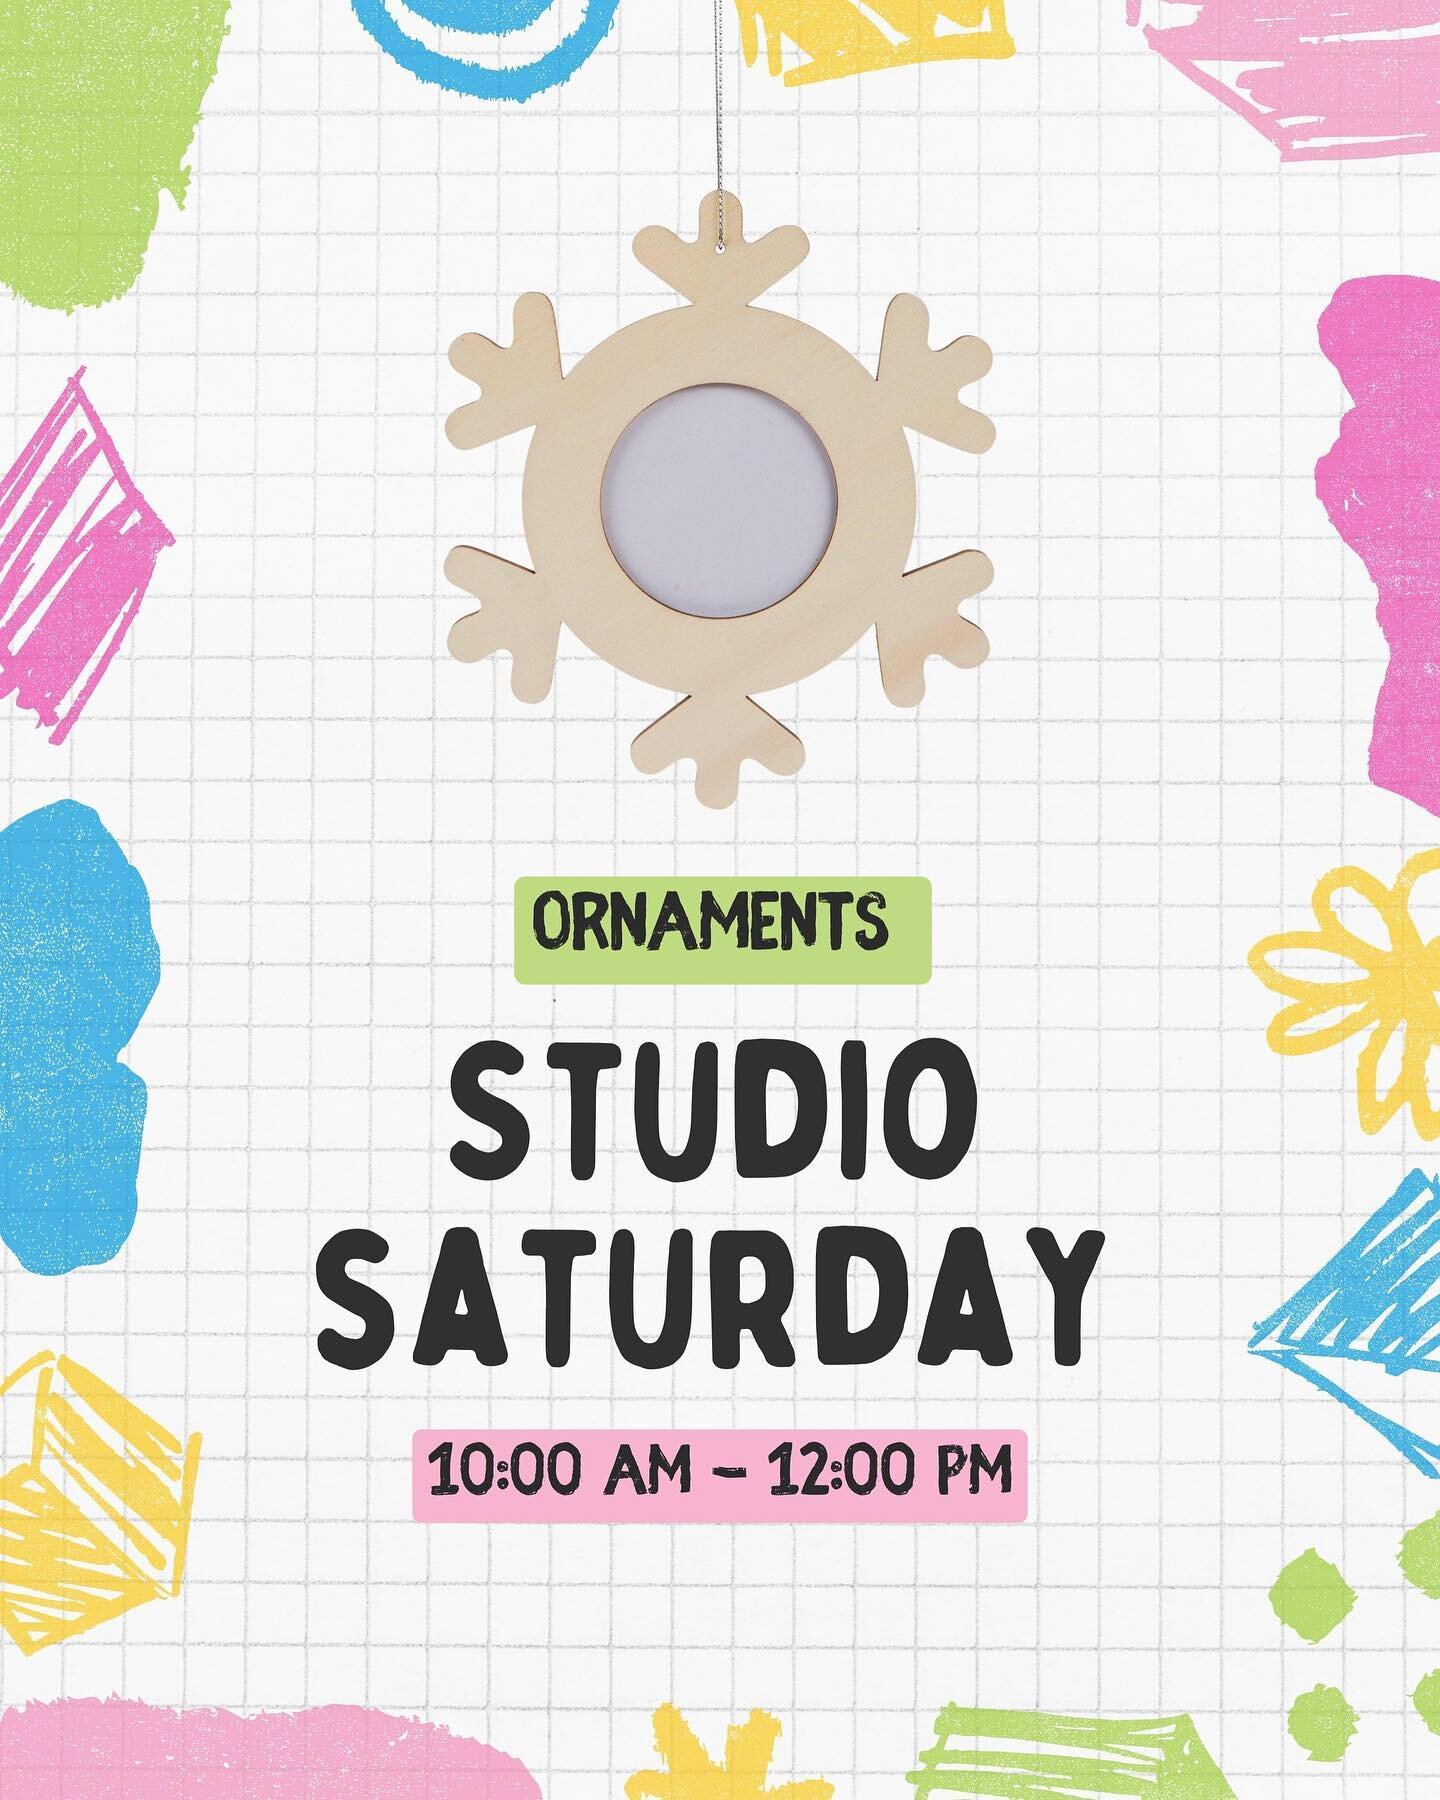 THIS SATURDAY

Come create custom ornaments with your family this Saturday morning from 10:00 - 12:00. We have two different styles to choose from and tons of supplies.

Will you paint it, mod podge it, glitterfy (yes we made that a word) it or mark 